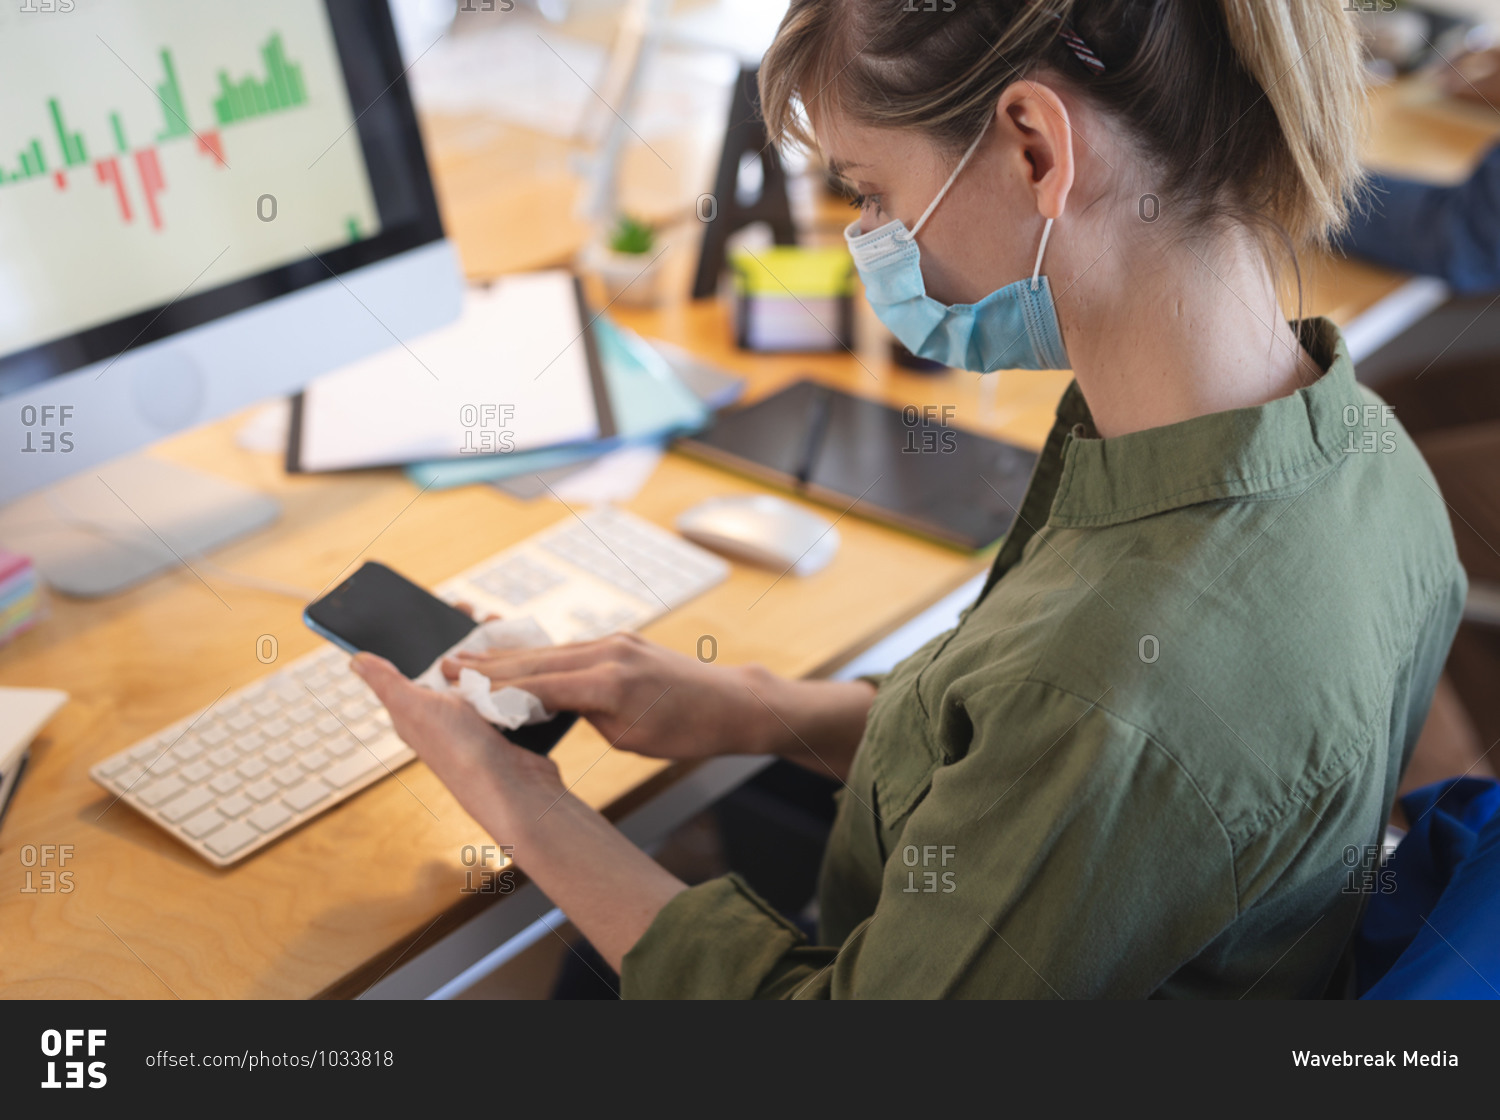 Caucasian female business creative sitting at desk in an office wearing face mask disinfecting her smartphone. Health and hygiene in workplace during Coronavirus Covid 19 pandemic.